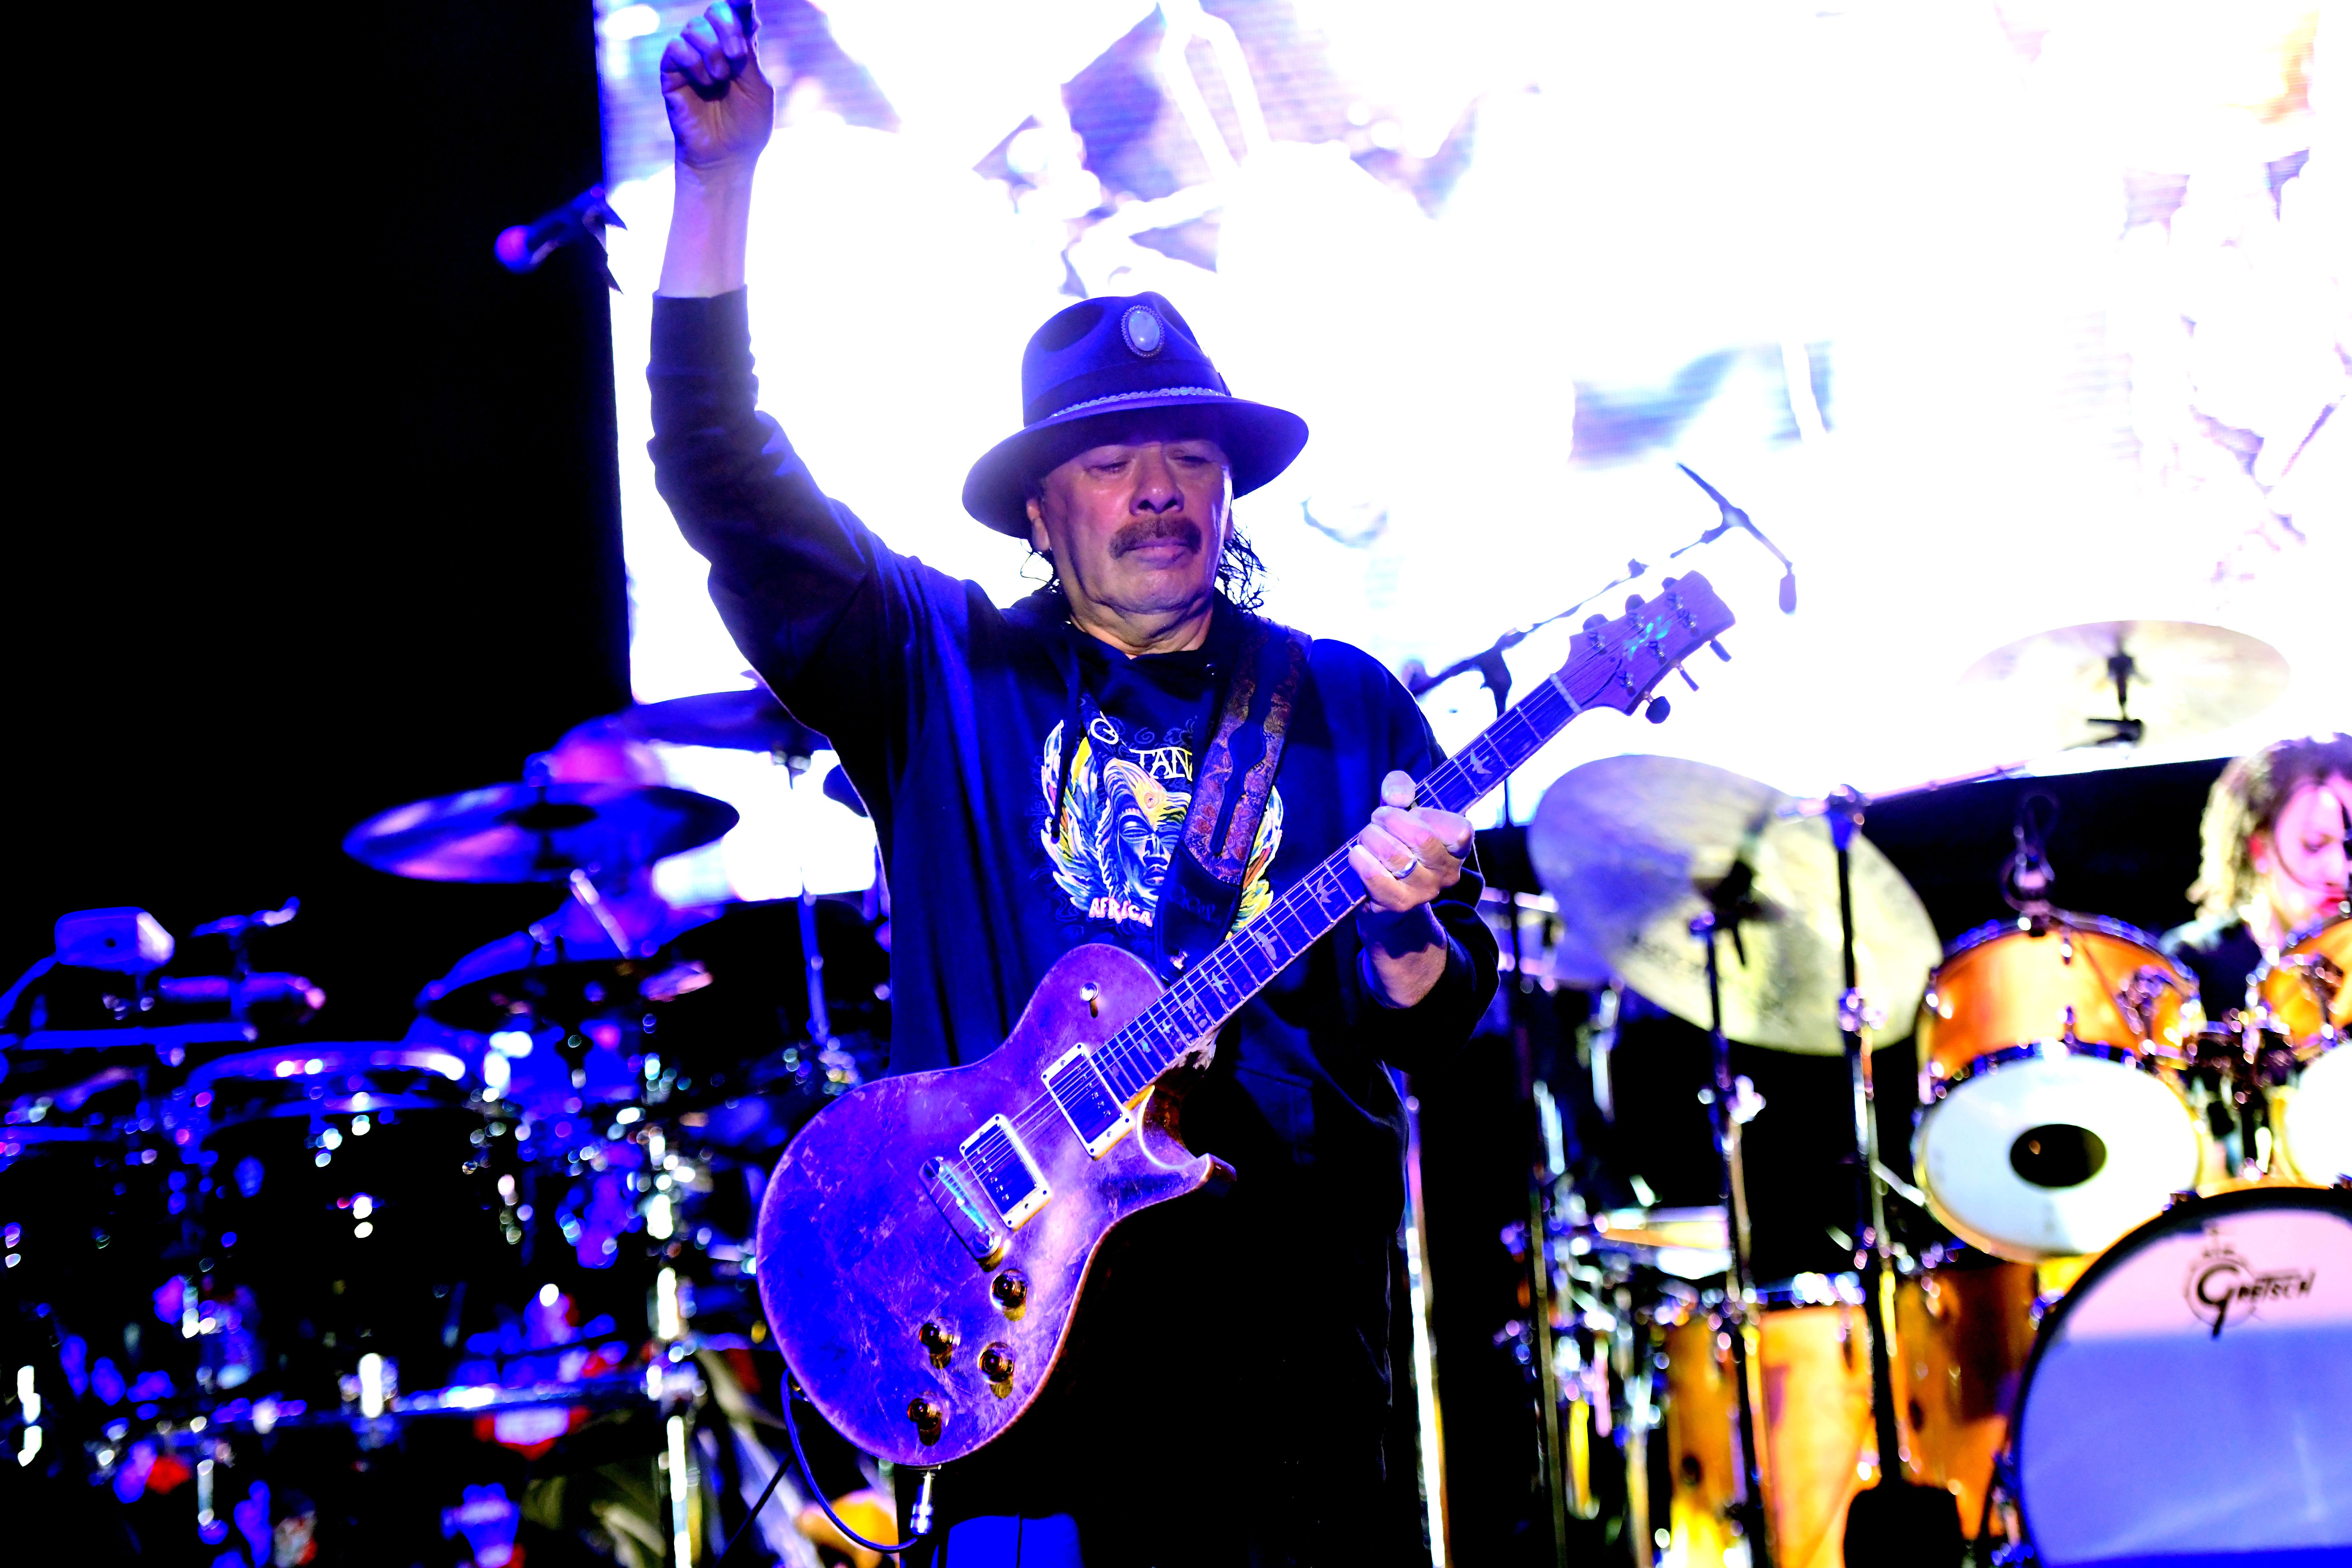 Carlos Santana at the FivePoint Amphitheater on June 20, 2019 in Irvine, California | Source: Getty Images